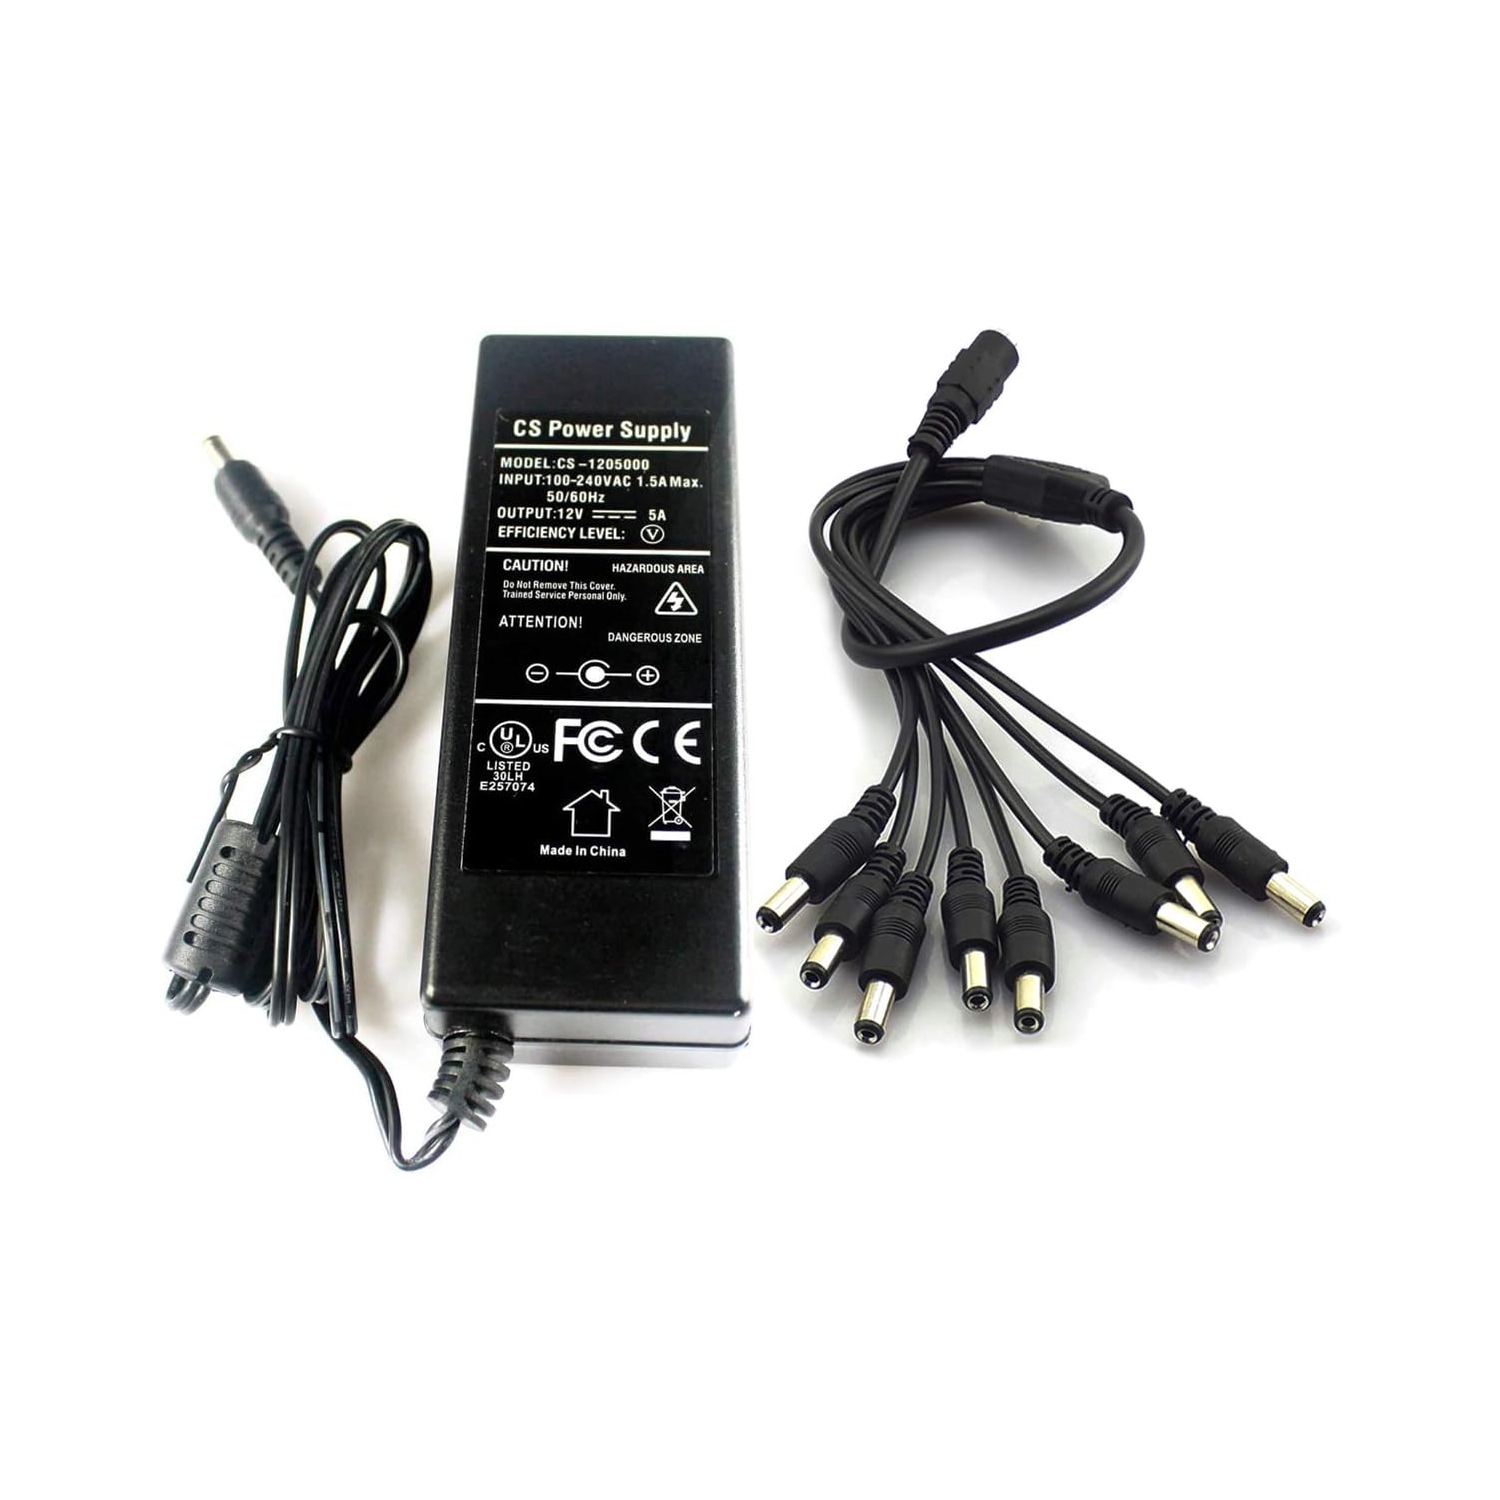 AC 100-240V to DC 12V 5A 60W Power Adapter Supply with 1 to 8 Splitter Cable UL cUL FCC